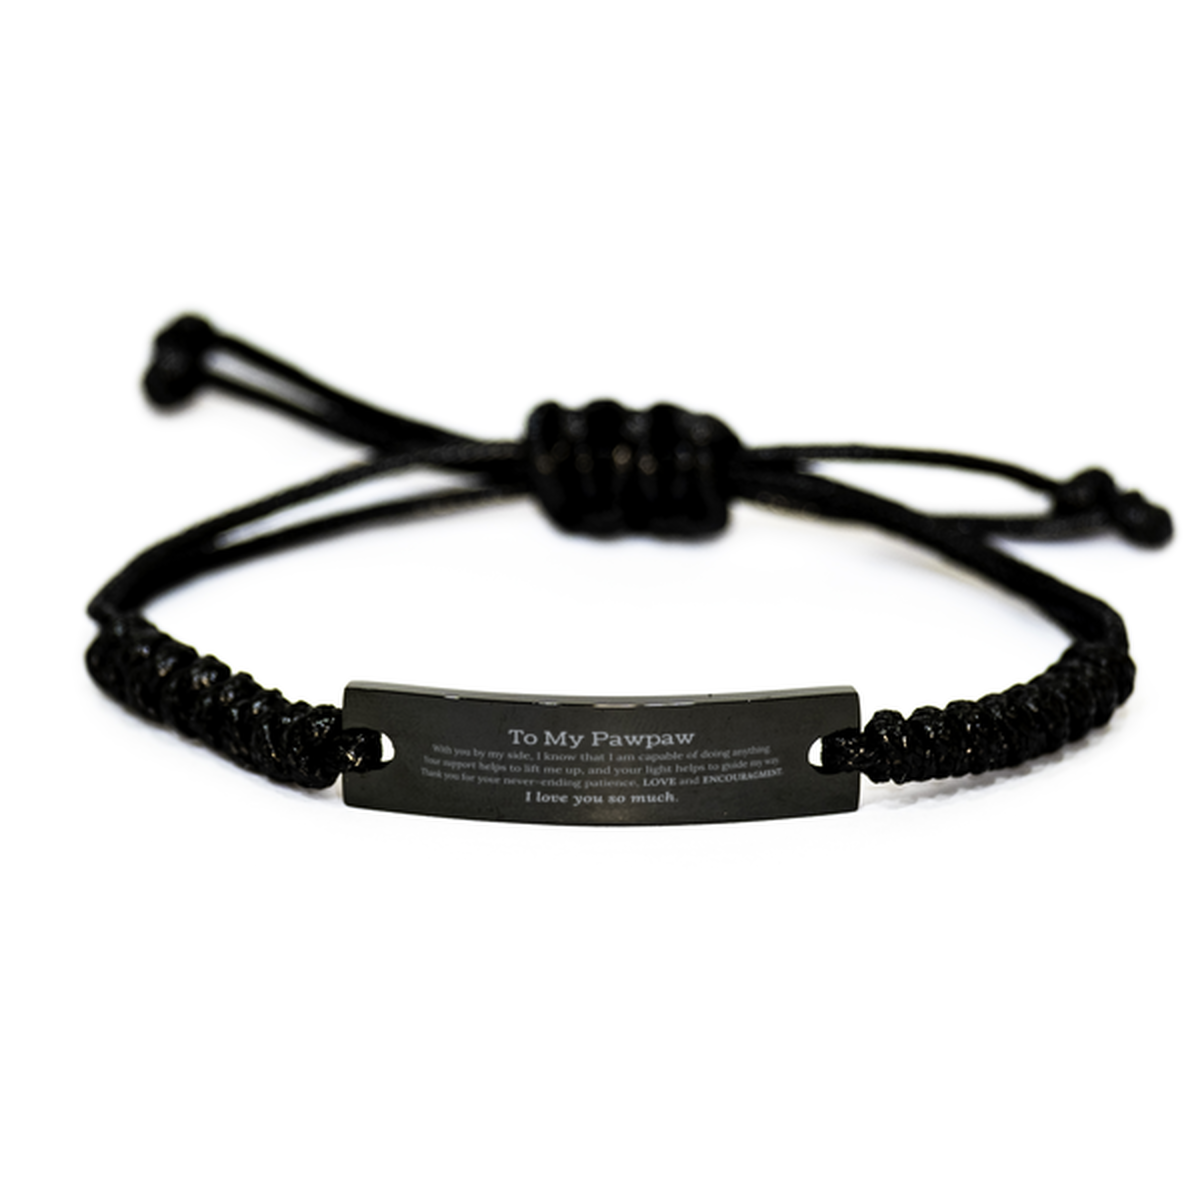 Appreciation Pawpaw Black Rope Bracelet Gifts, To My Pawpaw Birthday Christmas Wedding Keepsake Gifts for Pawpaw With you by my side, I know that I am capable of doing anything. I love you so much